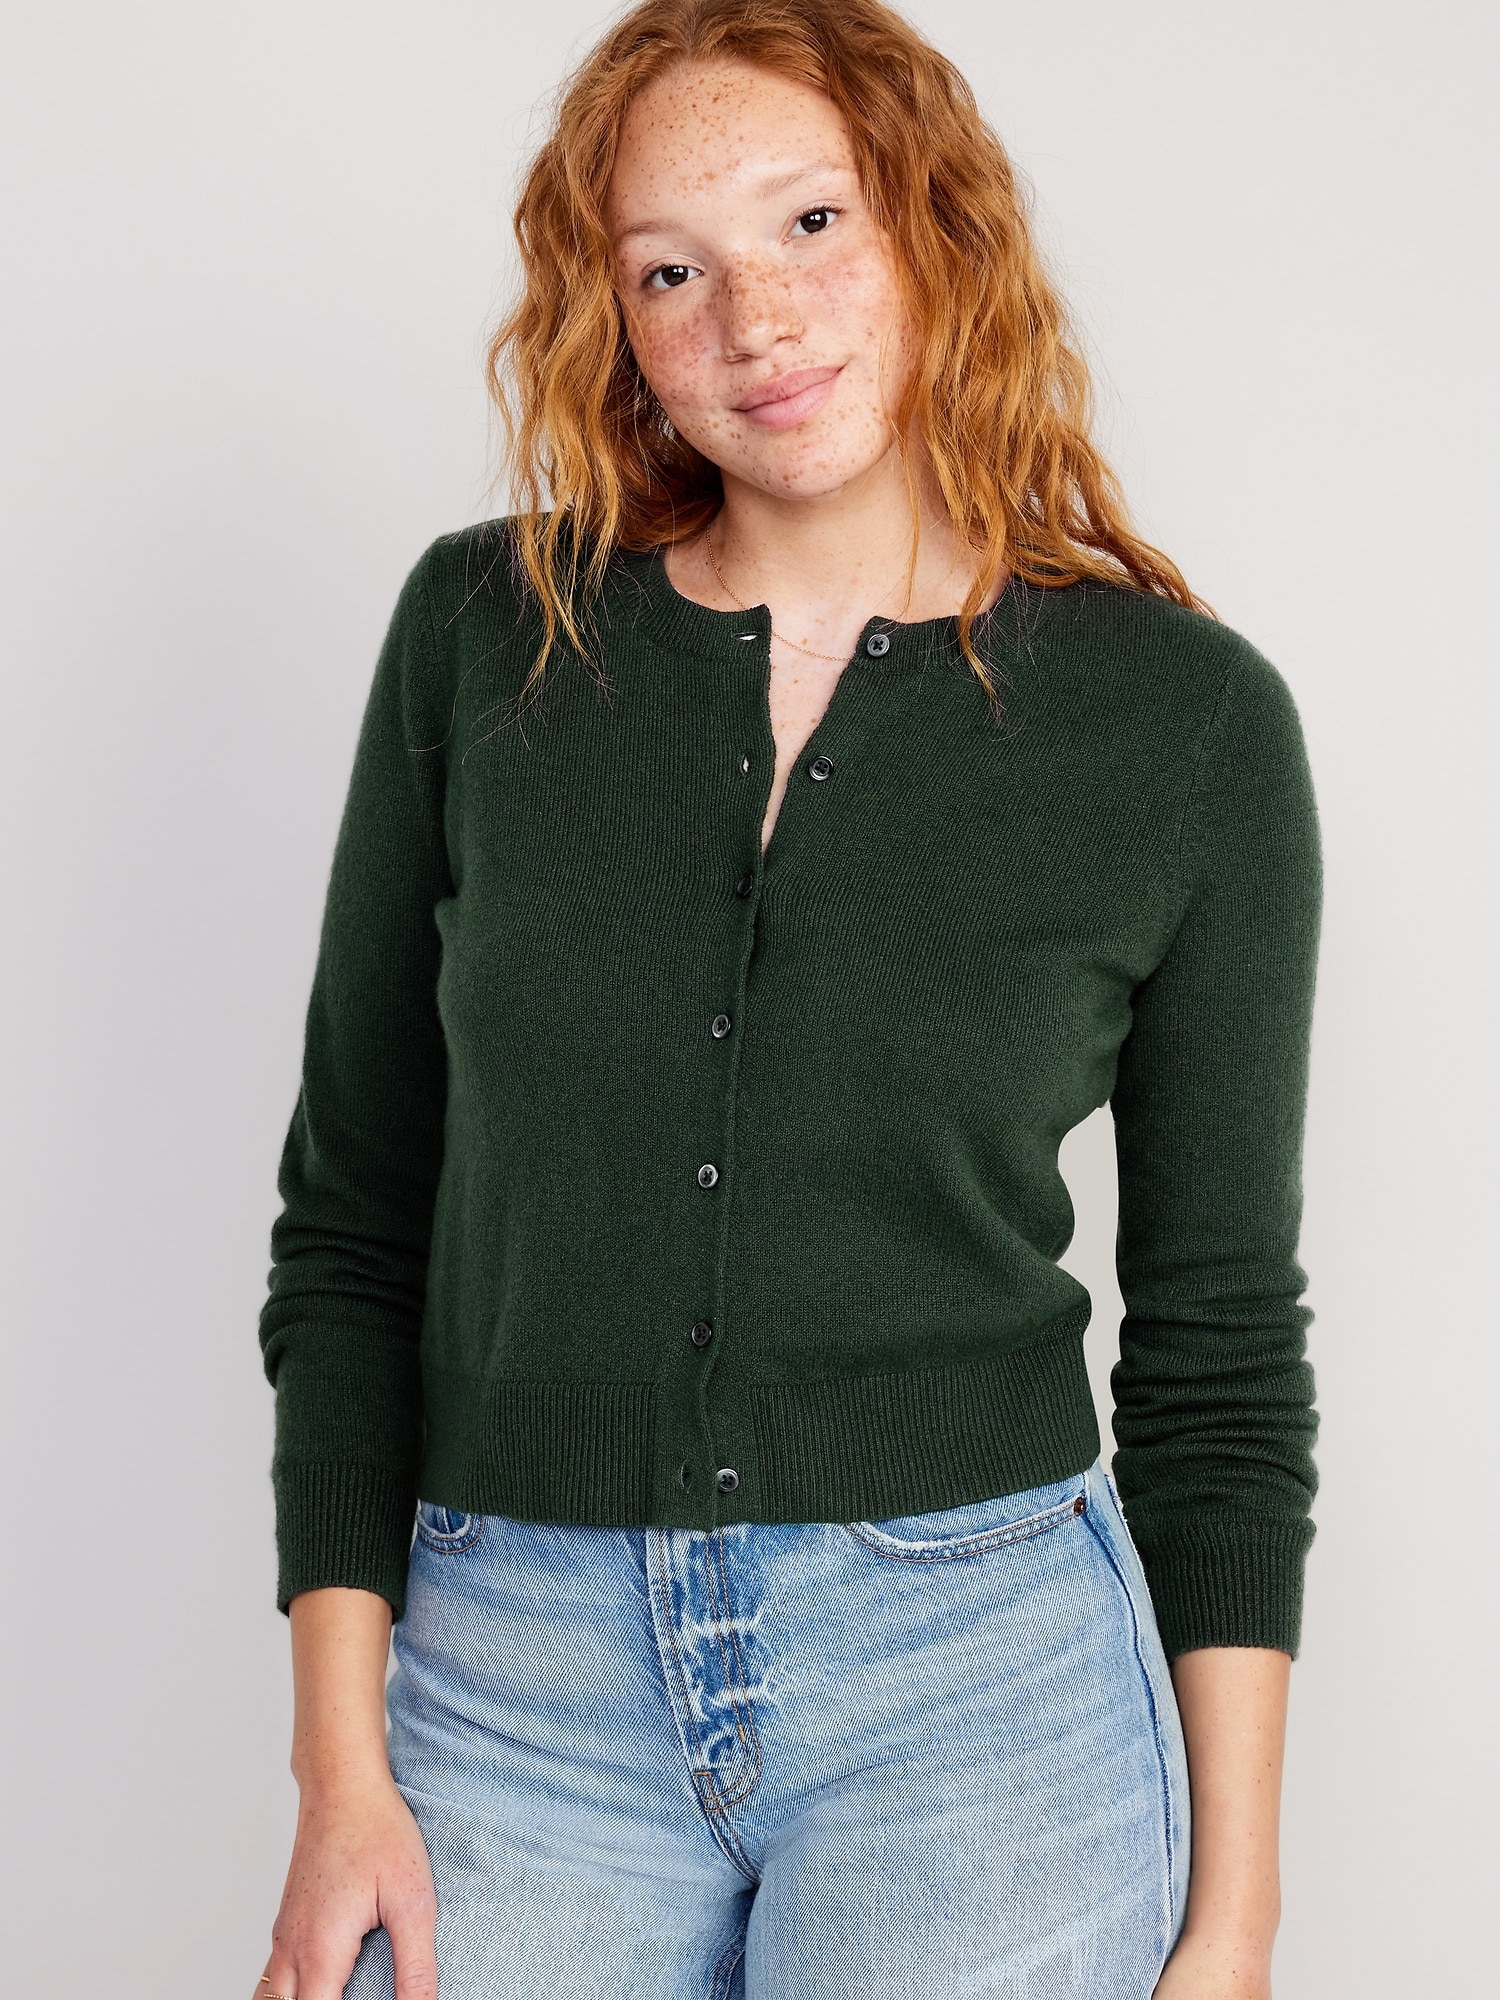 SoSoft Cropped Cardigan Sweater for Women | Old Navy